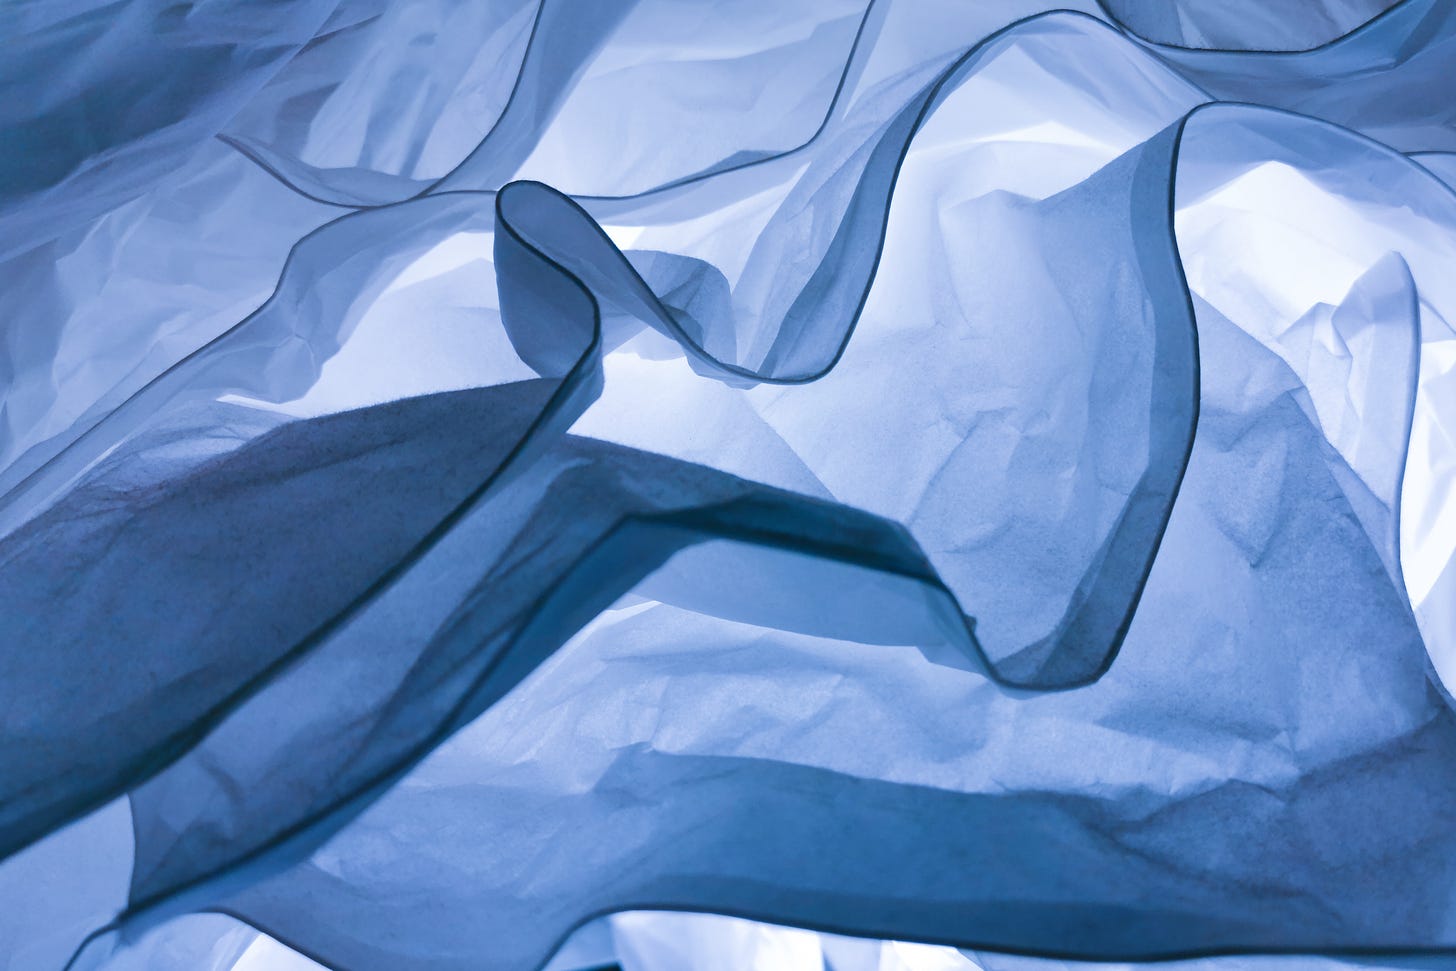 Abstract photo, waves of fabric backlit with bluish light